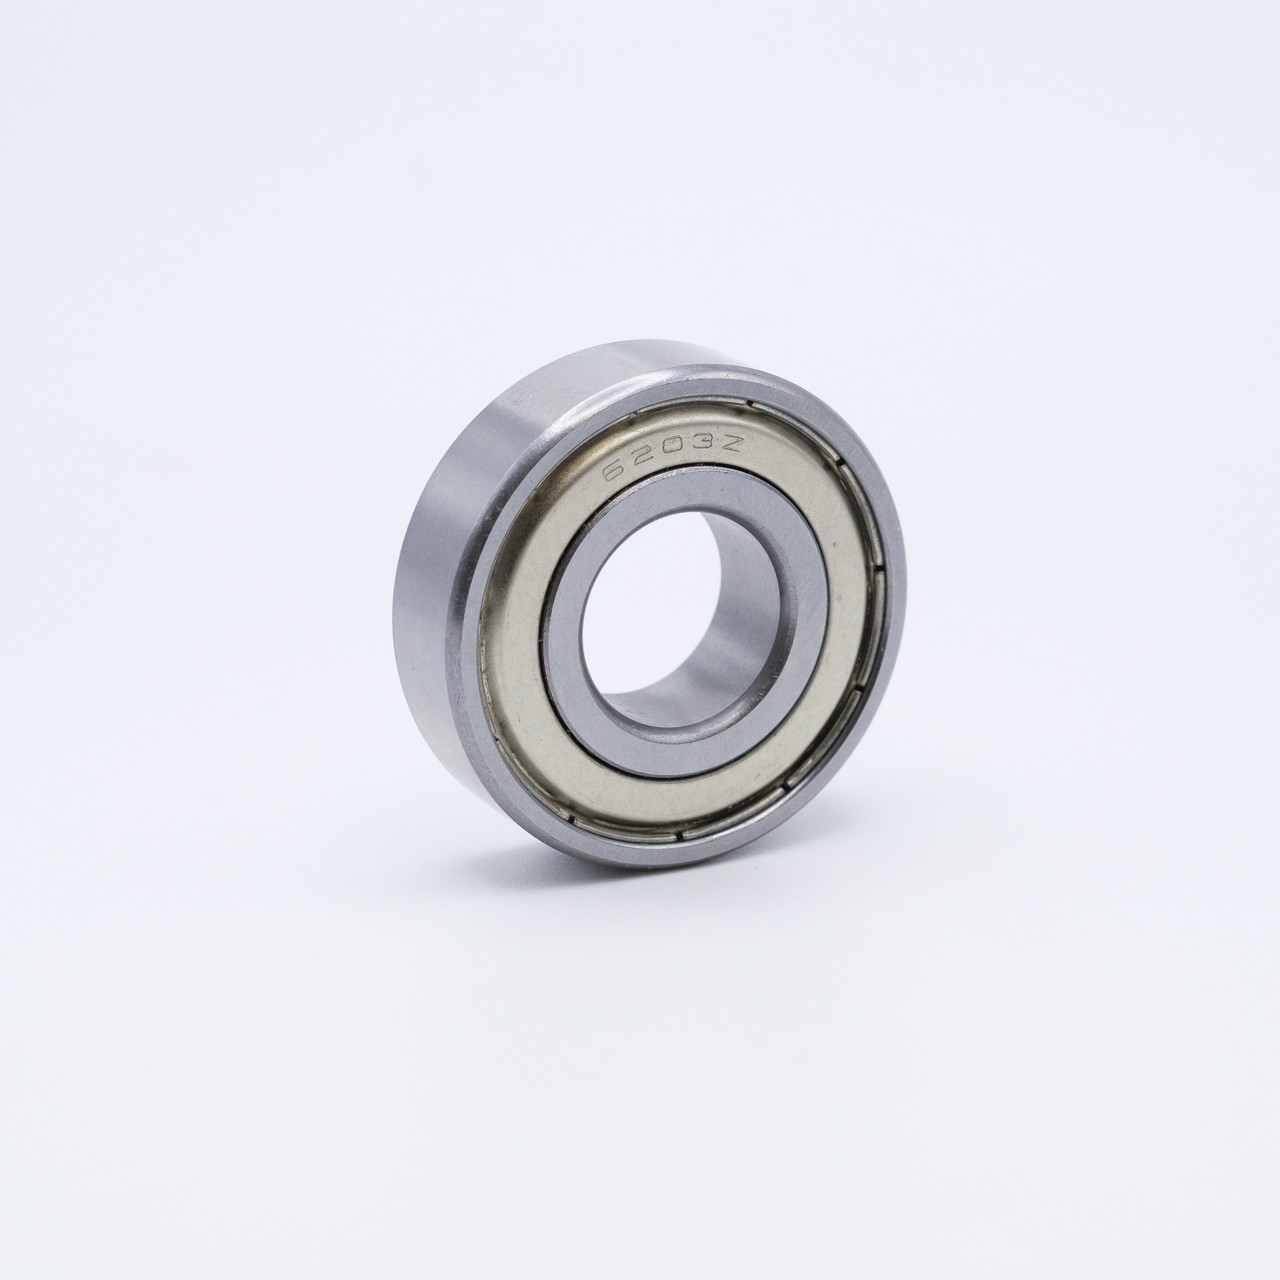 S6203-ZZ Stainless Ball Bearing 17x40x12 Angled View